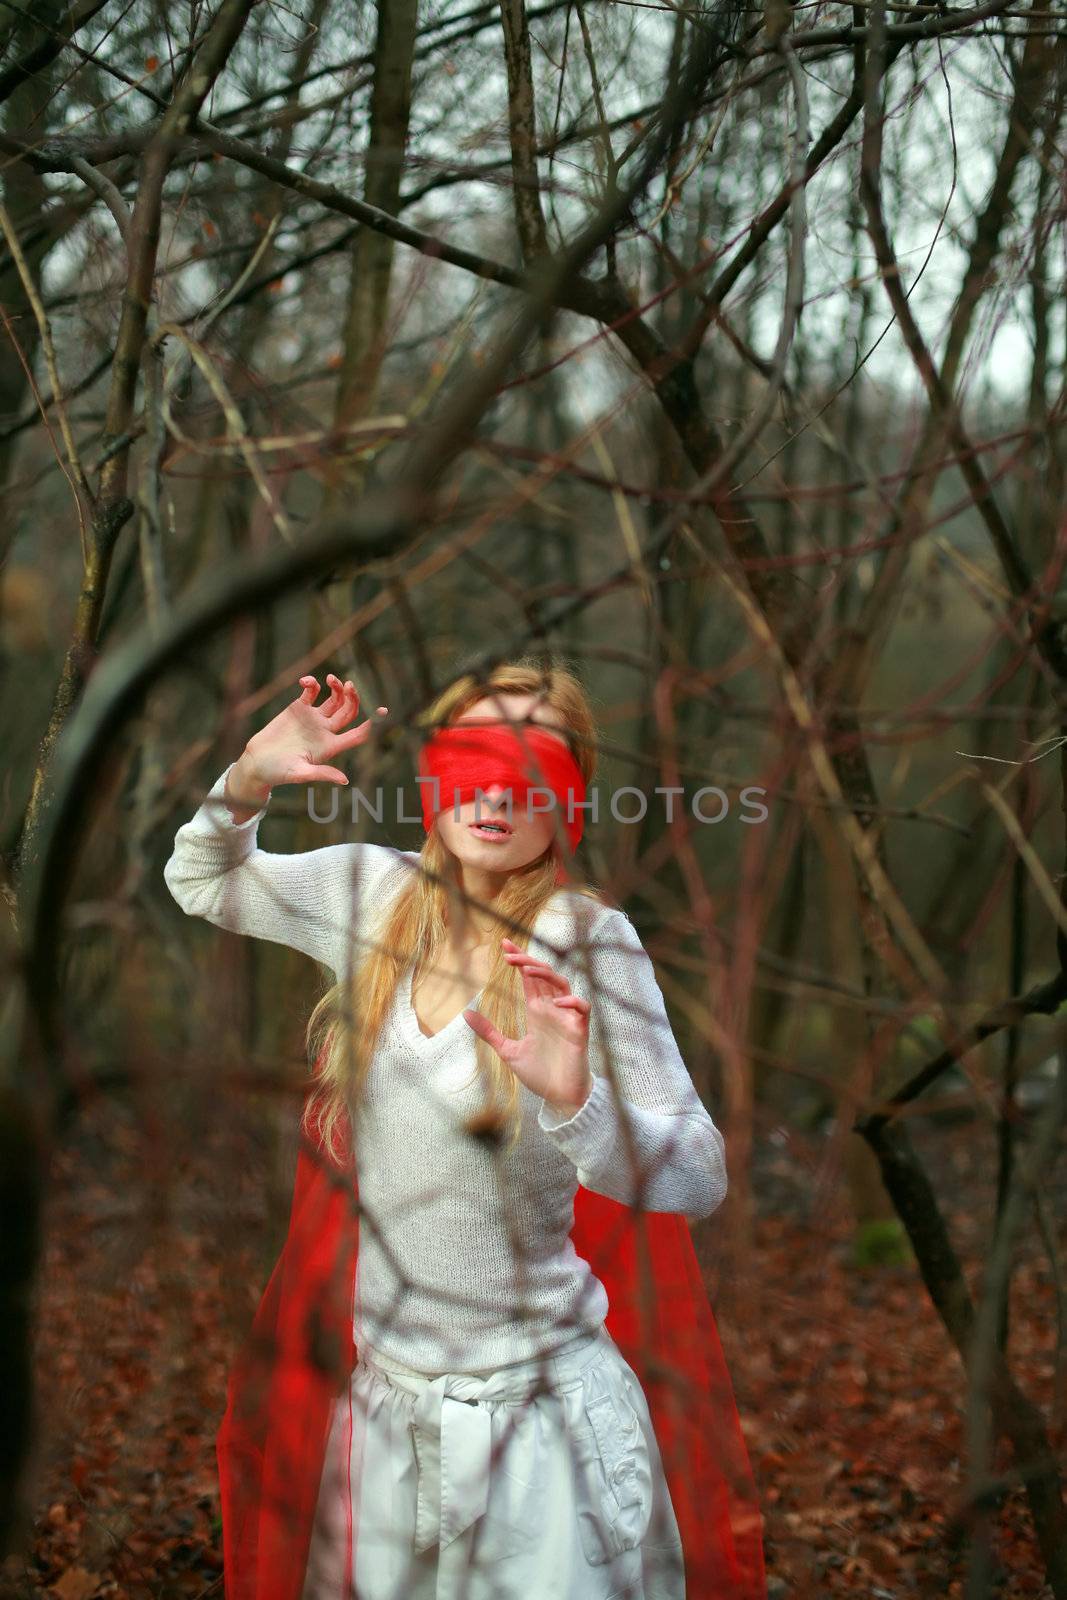 An image of girl with red blindfold in a forest